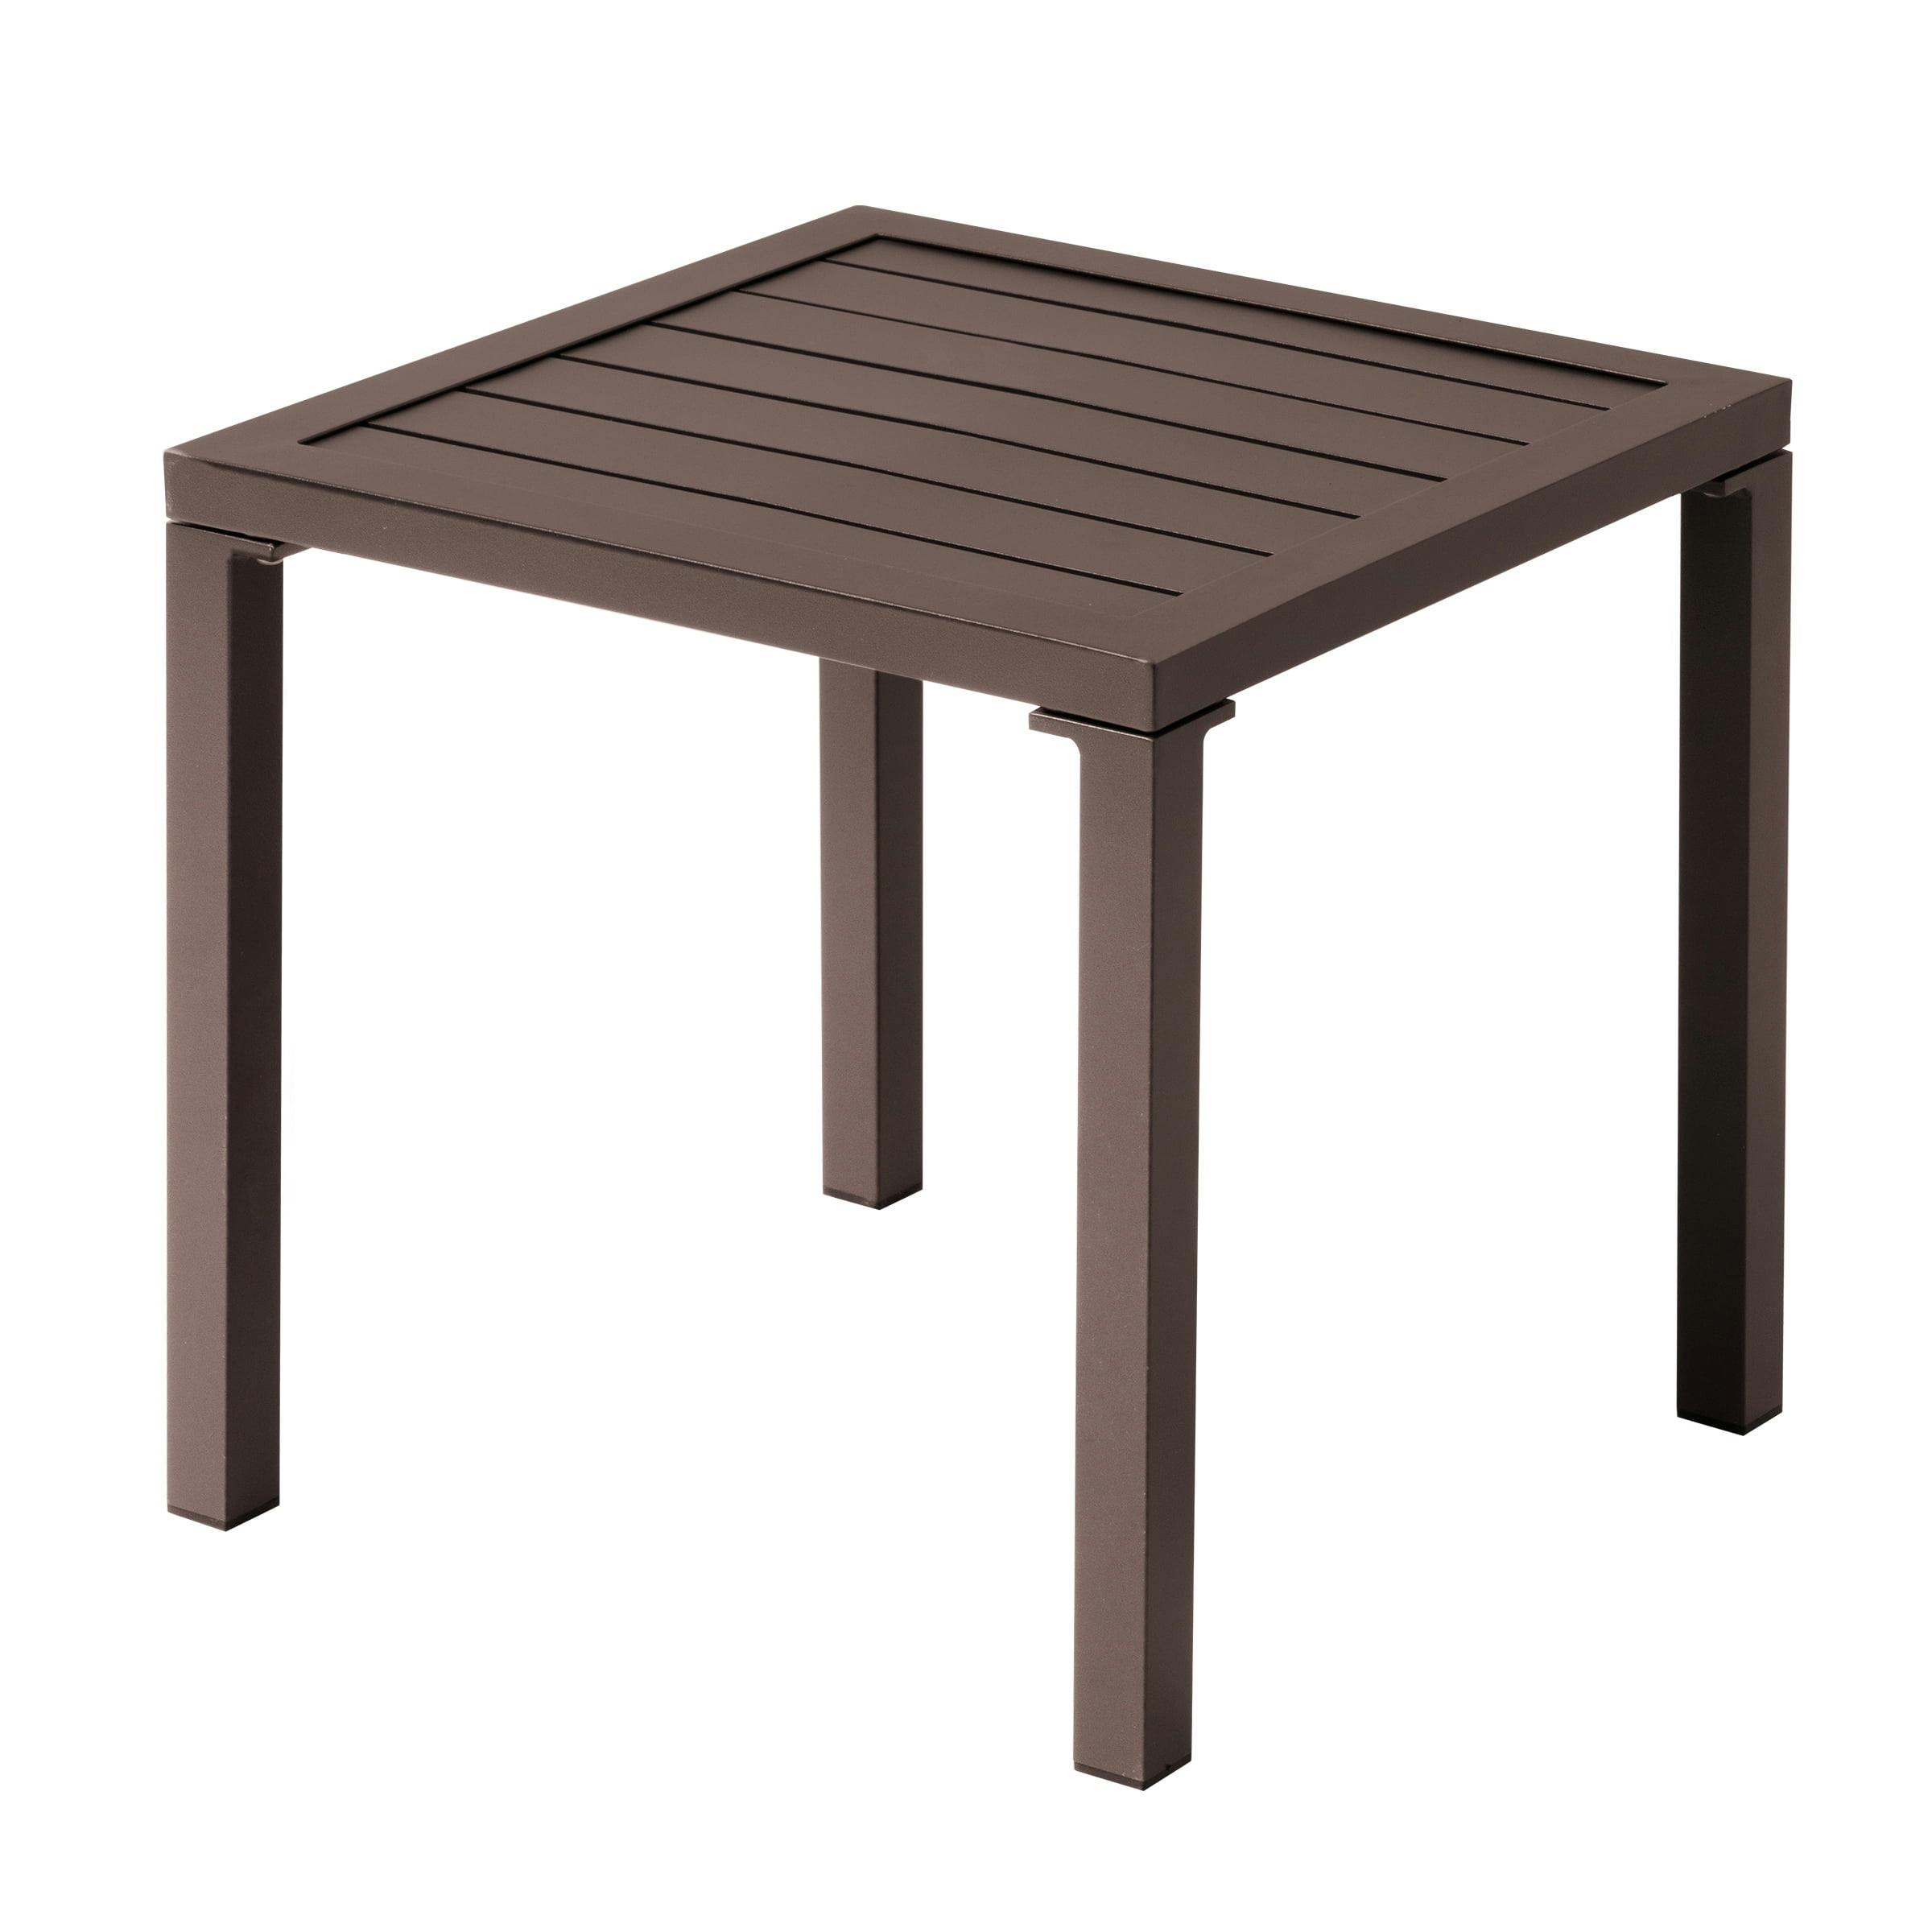 Ergonomic Outdoor Aluminum Lounge Set with Adjustable Chairs & Side Table - Brown